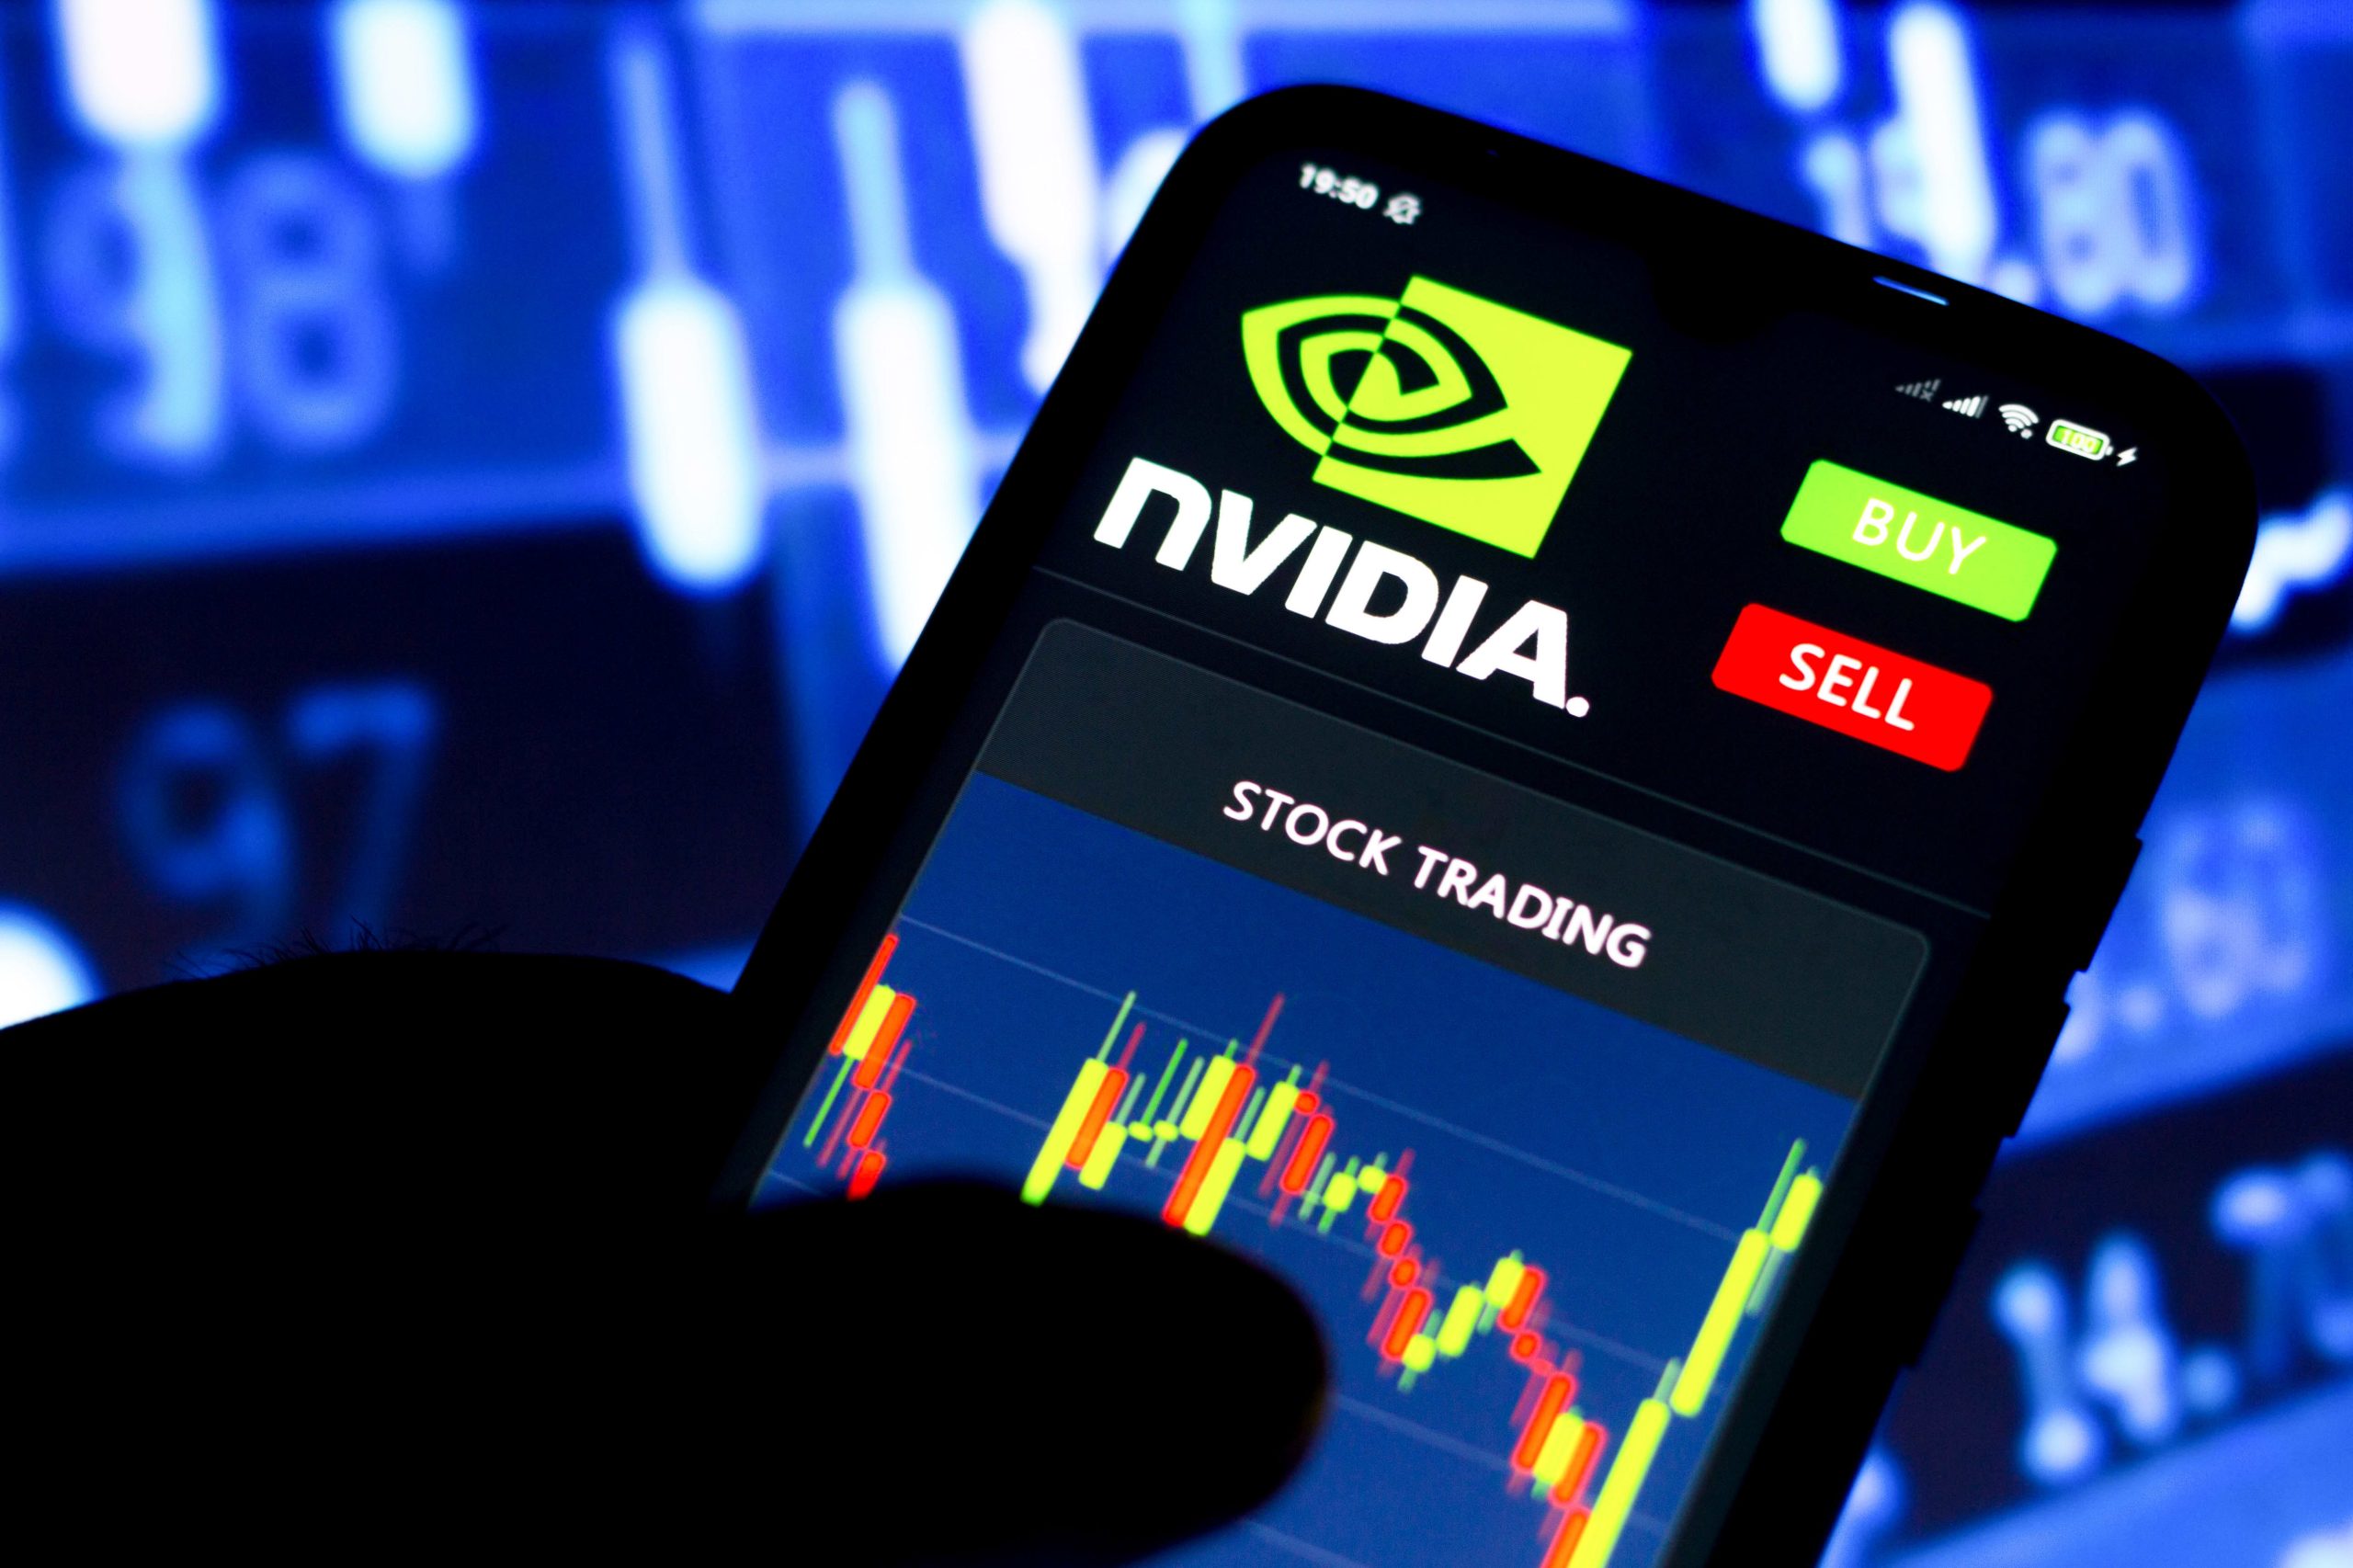 Nvidia rally fueled FOMO in overall market: Evercore's Julian Emanuel